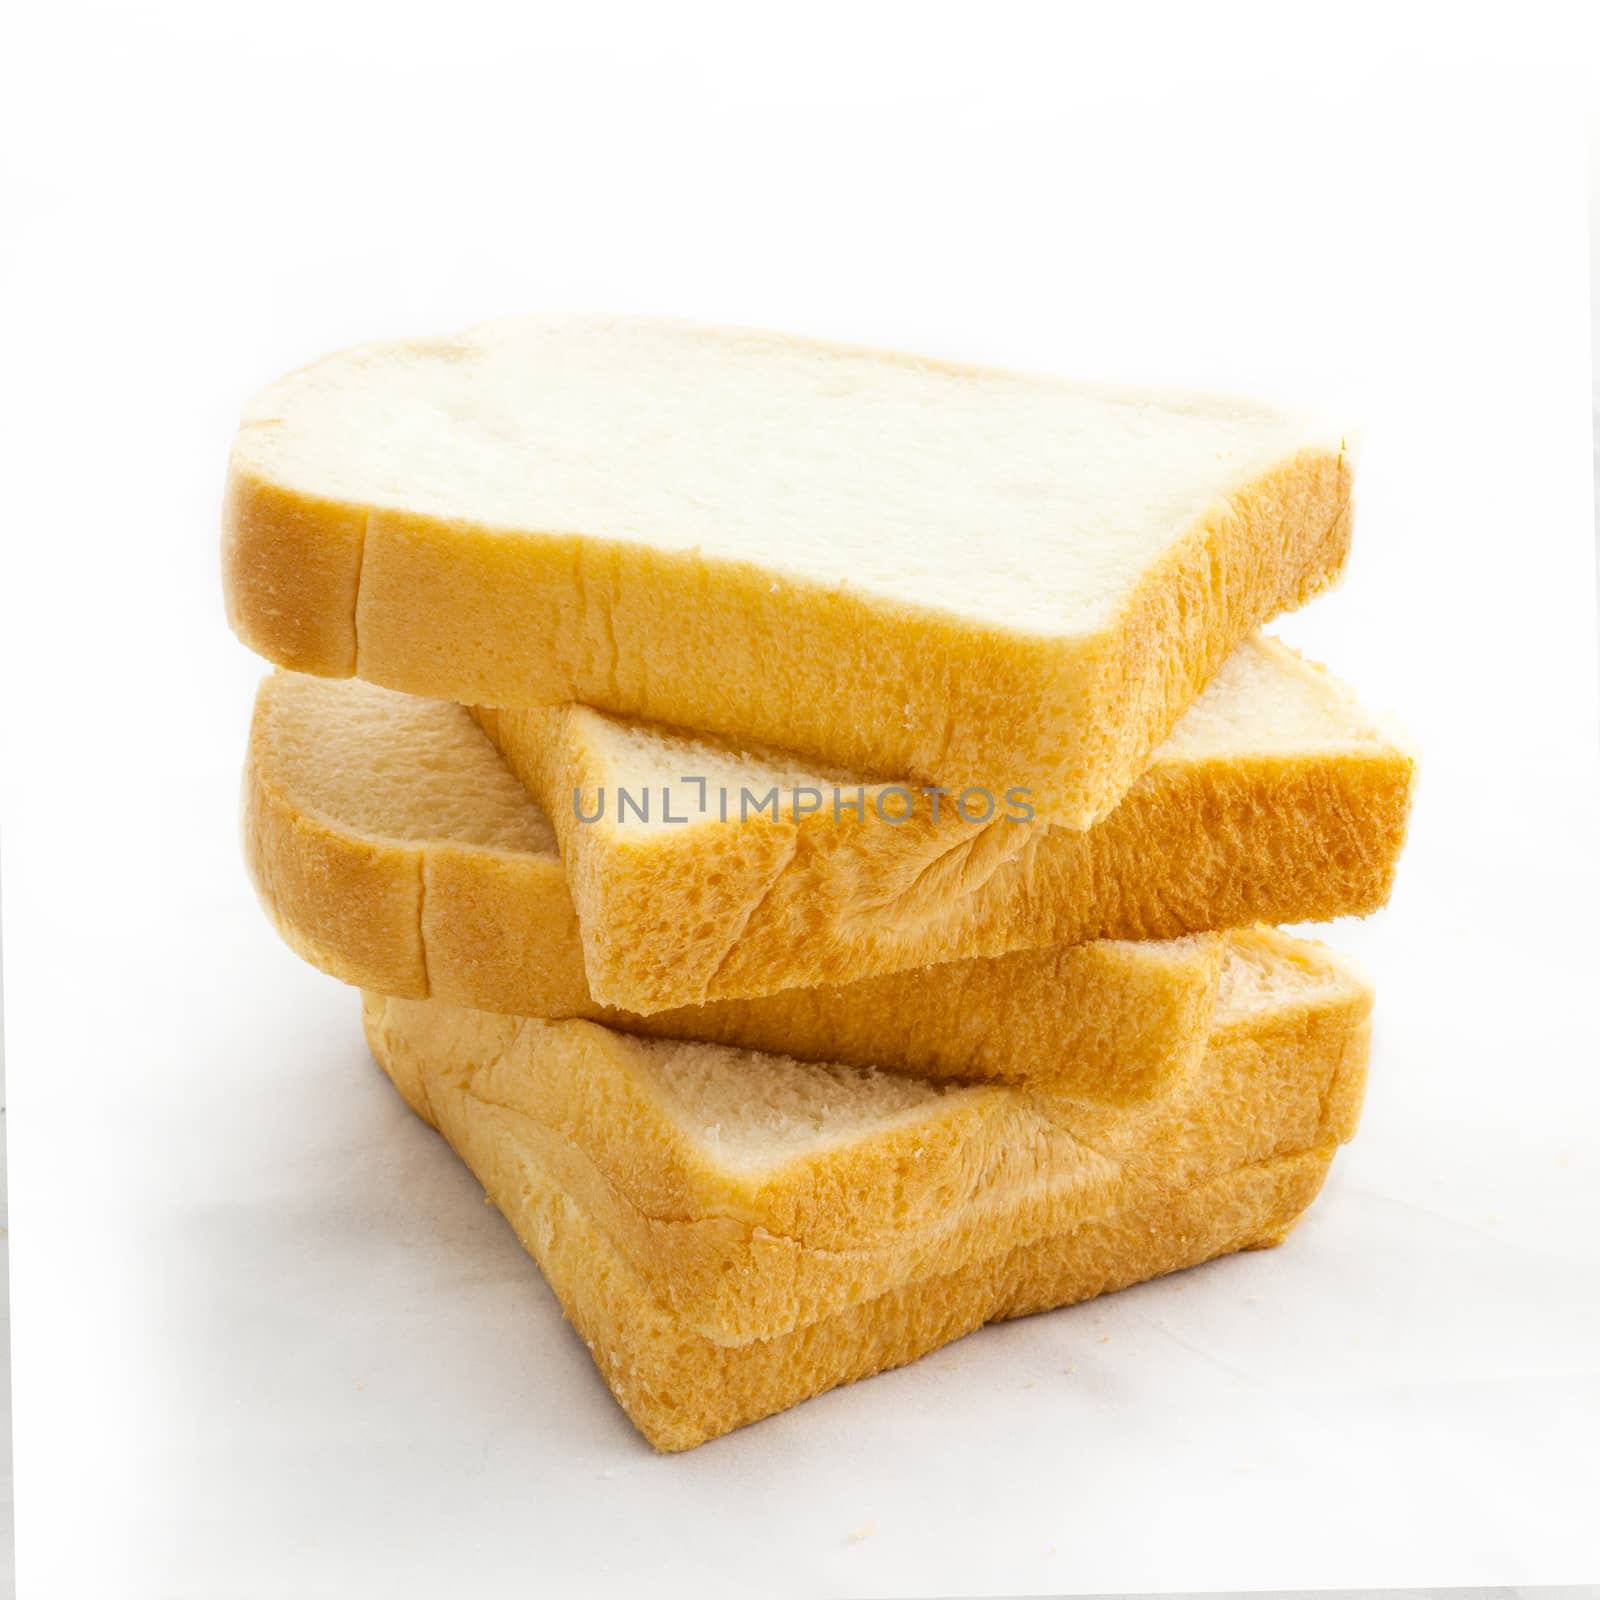 Sliced bread isolated on white background .